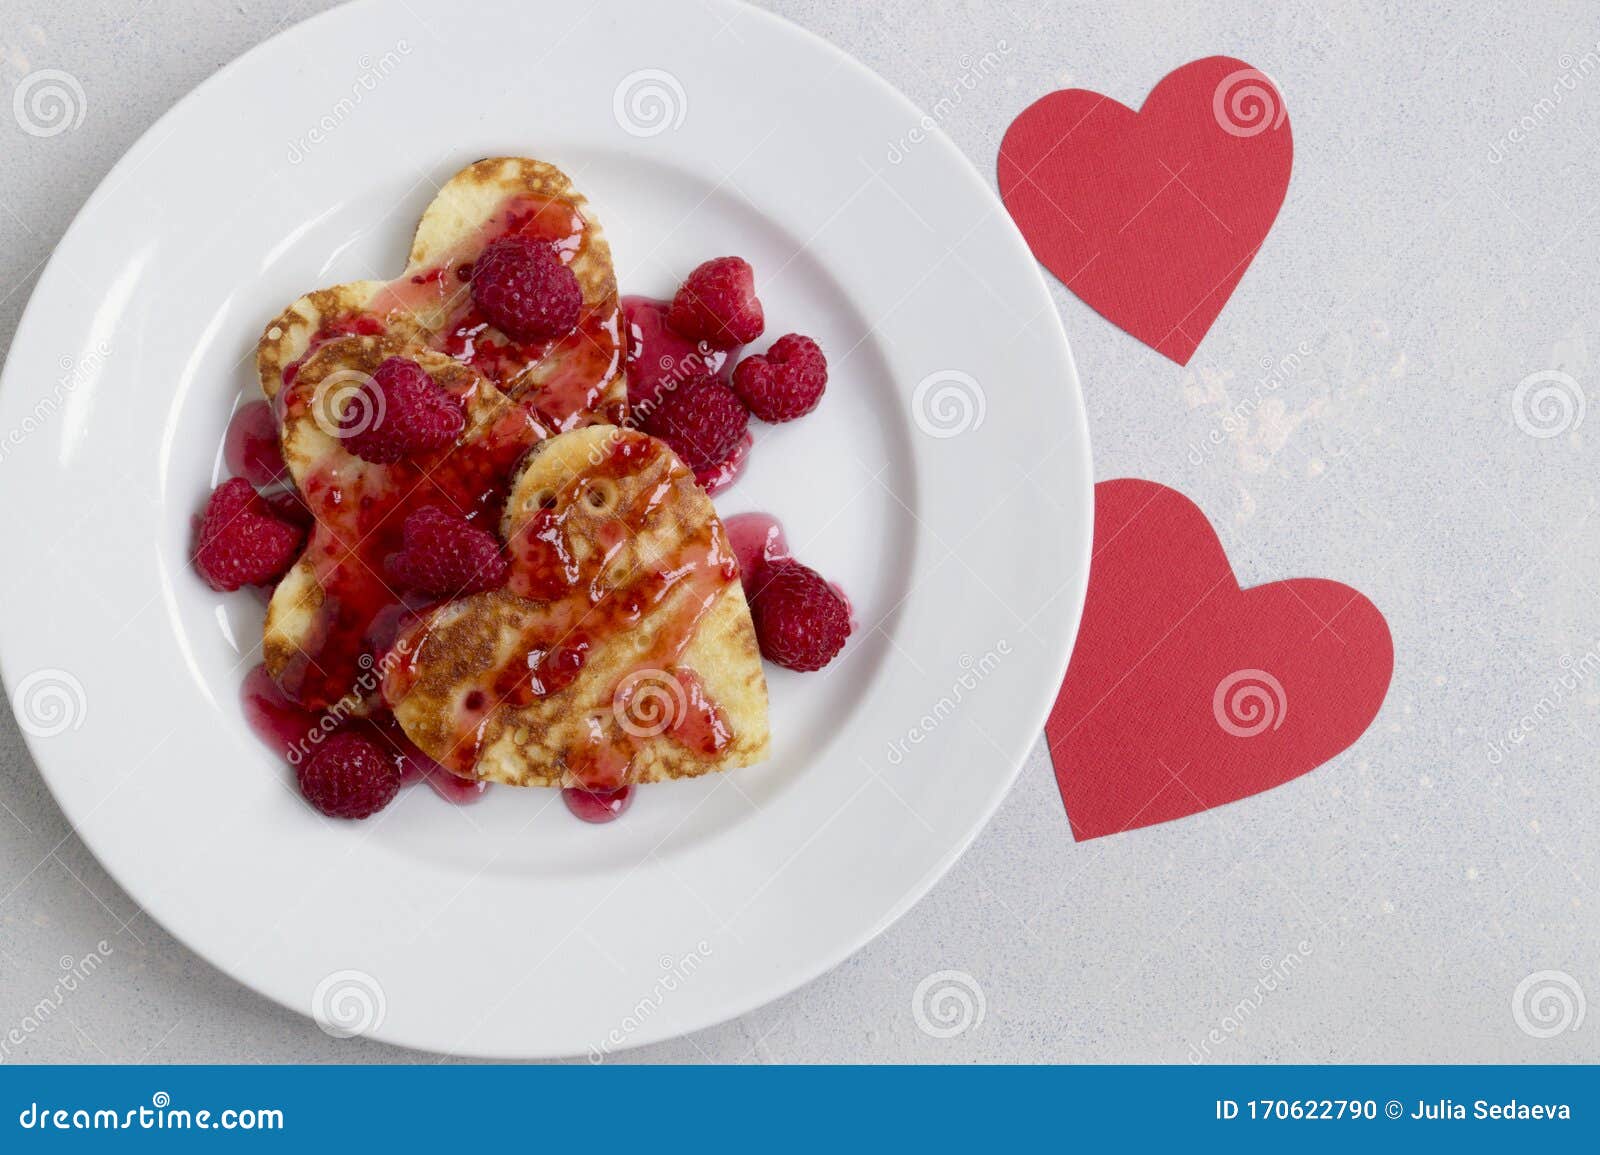 Pancakes in the Shape of a Heart Stock Photo - Image of recipe, heart ...